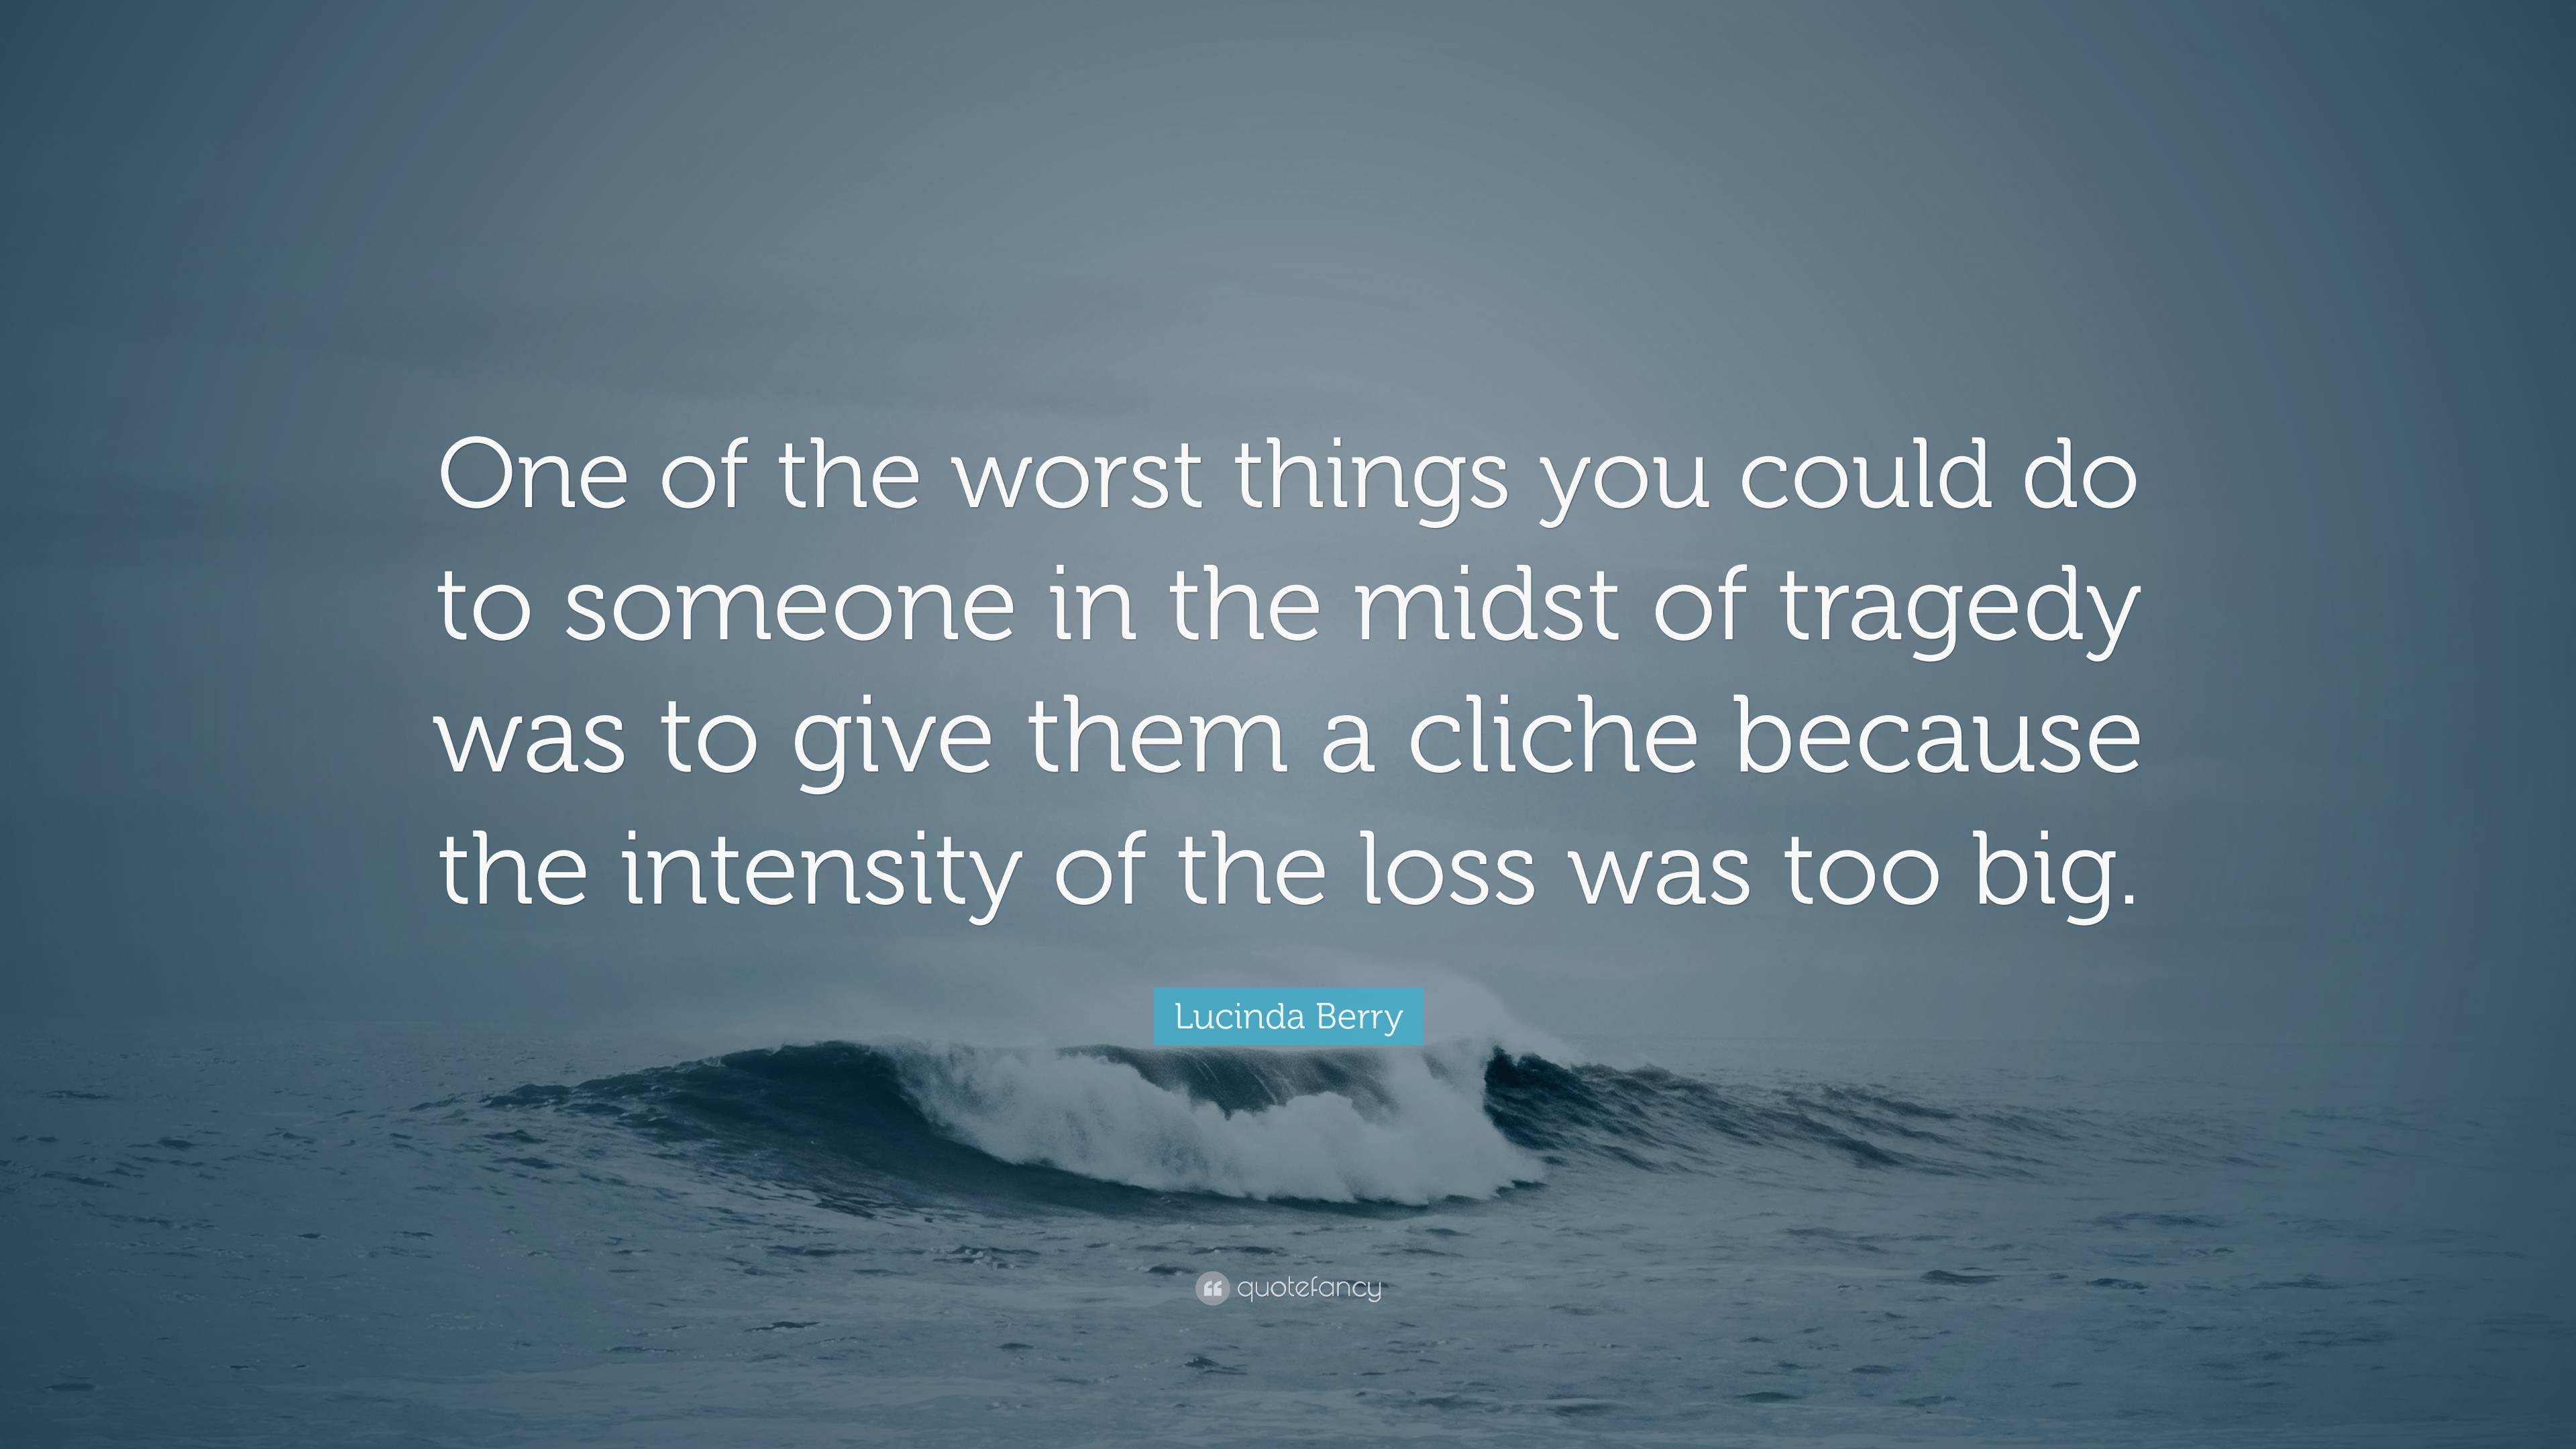 Lucinda Berry Quote: “One of the worst things you could do to someone ...